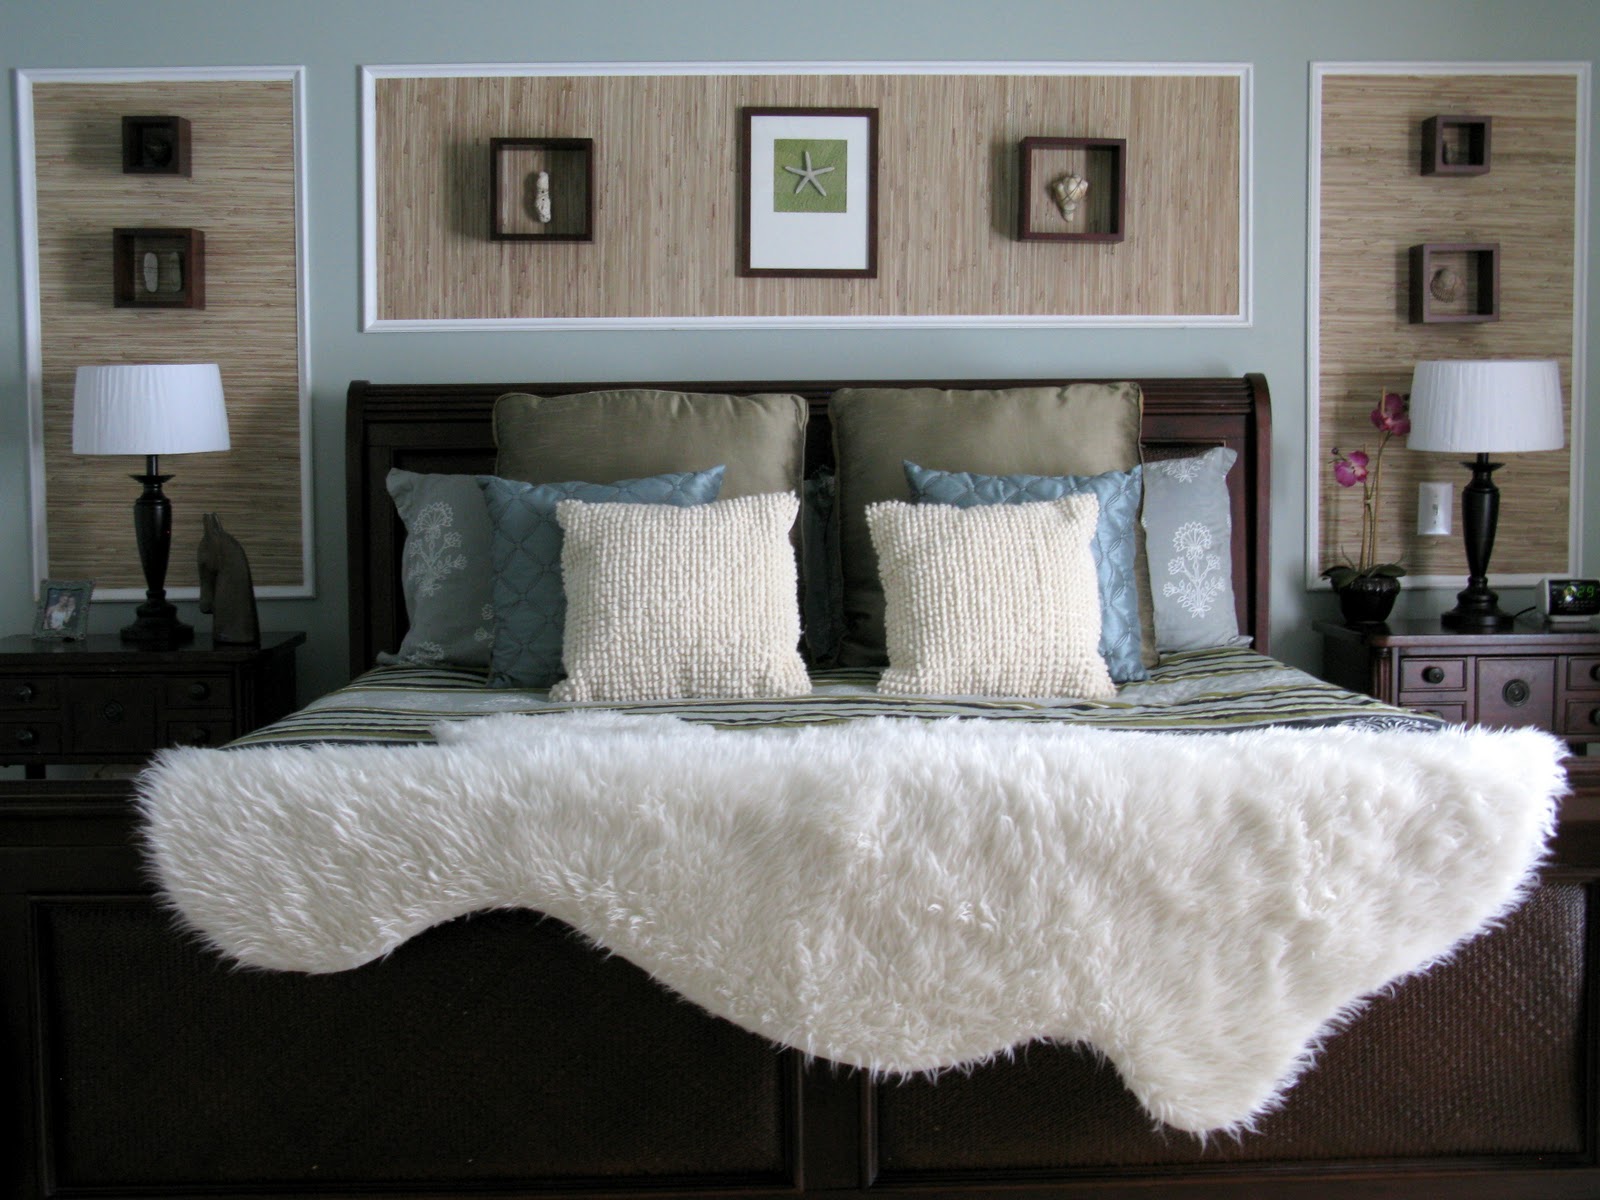 Voted One Of The Top Bedrooms By Houzz Readers My Headboard Canopy